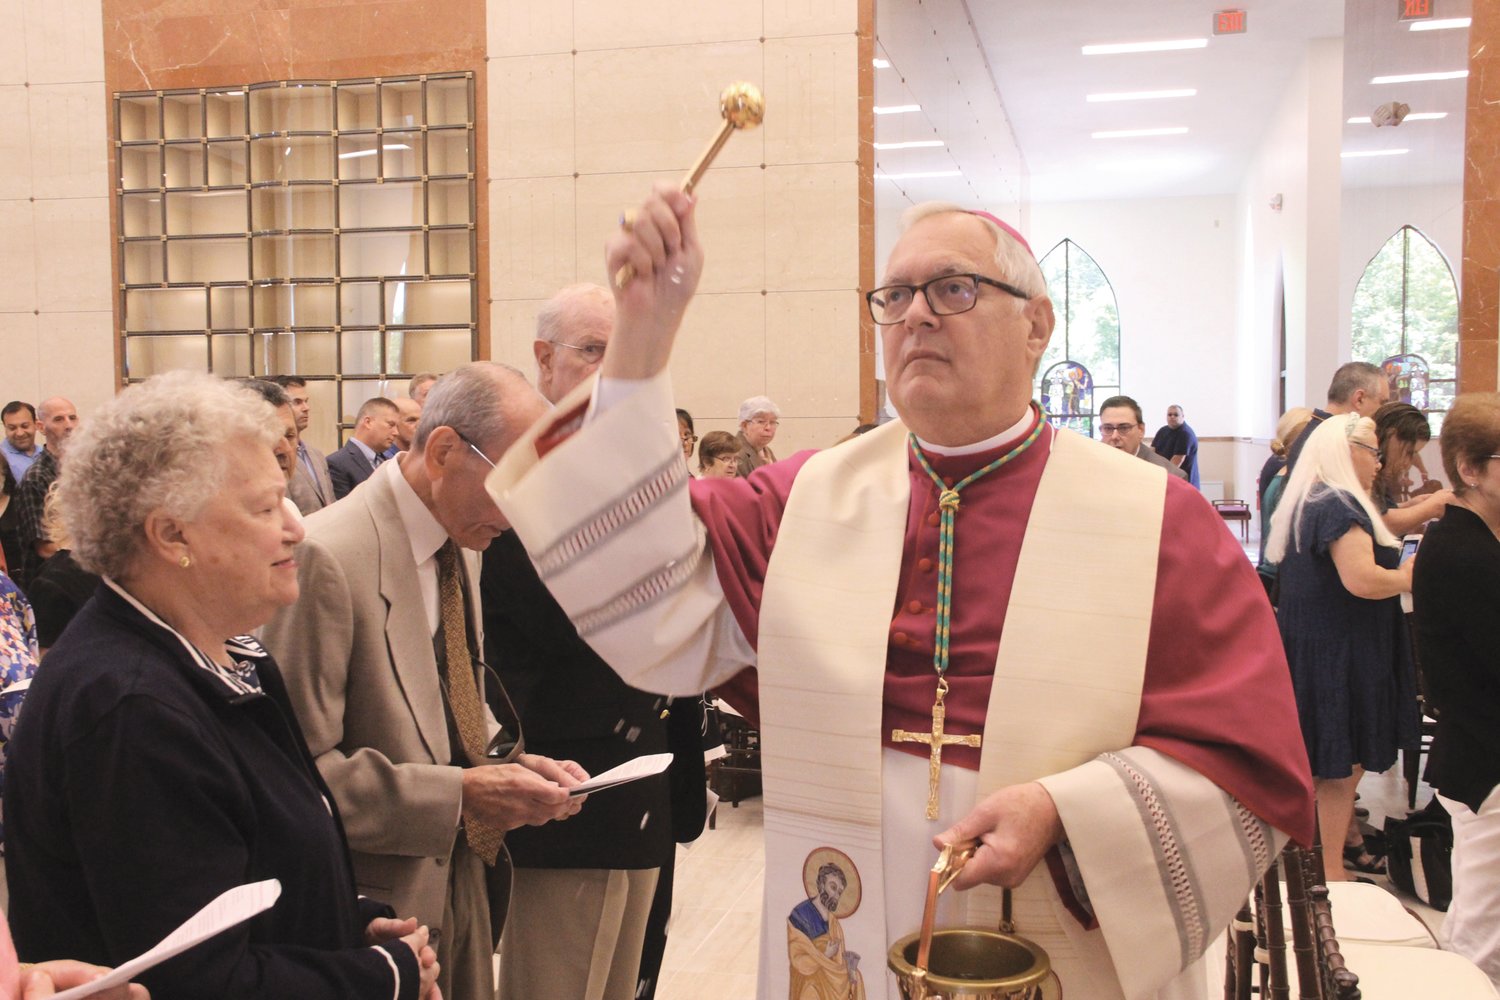 BLESSING: Following his homily, Roman Catholic Bishop Thomas J. Tobin blessed the mausoleum, sprinkling holy water throughout the chapel and corridors.